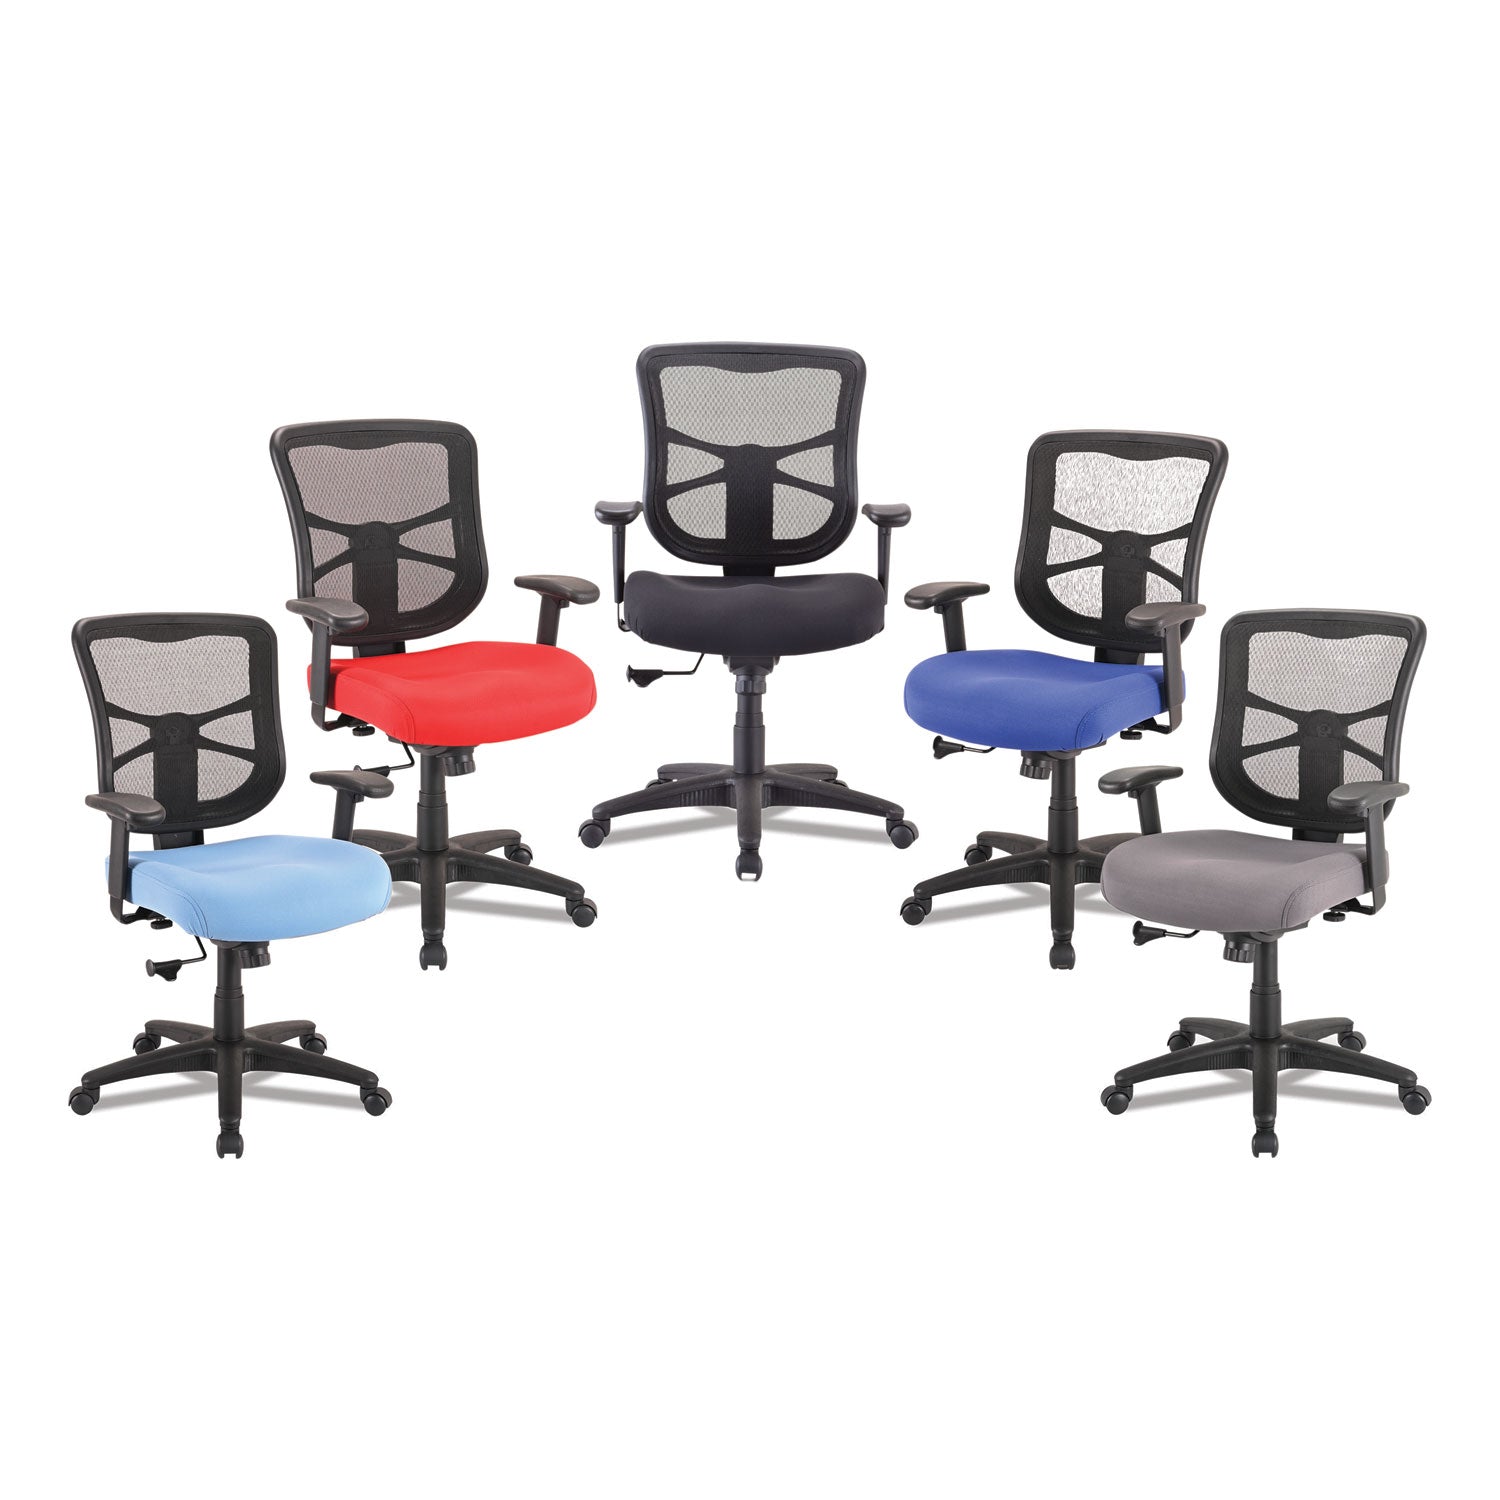 alera-elusion-series-mesh-mid-back-swivel-tilt-chair-supports-up-to-275-lb-179-to-218-seat-height-red_aleel42bme30b - 8